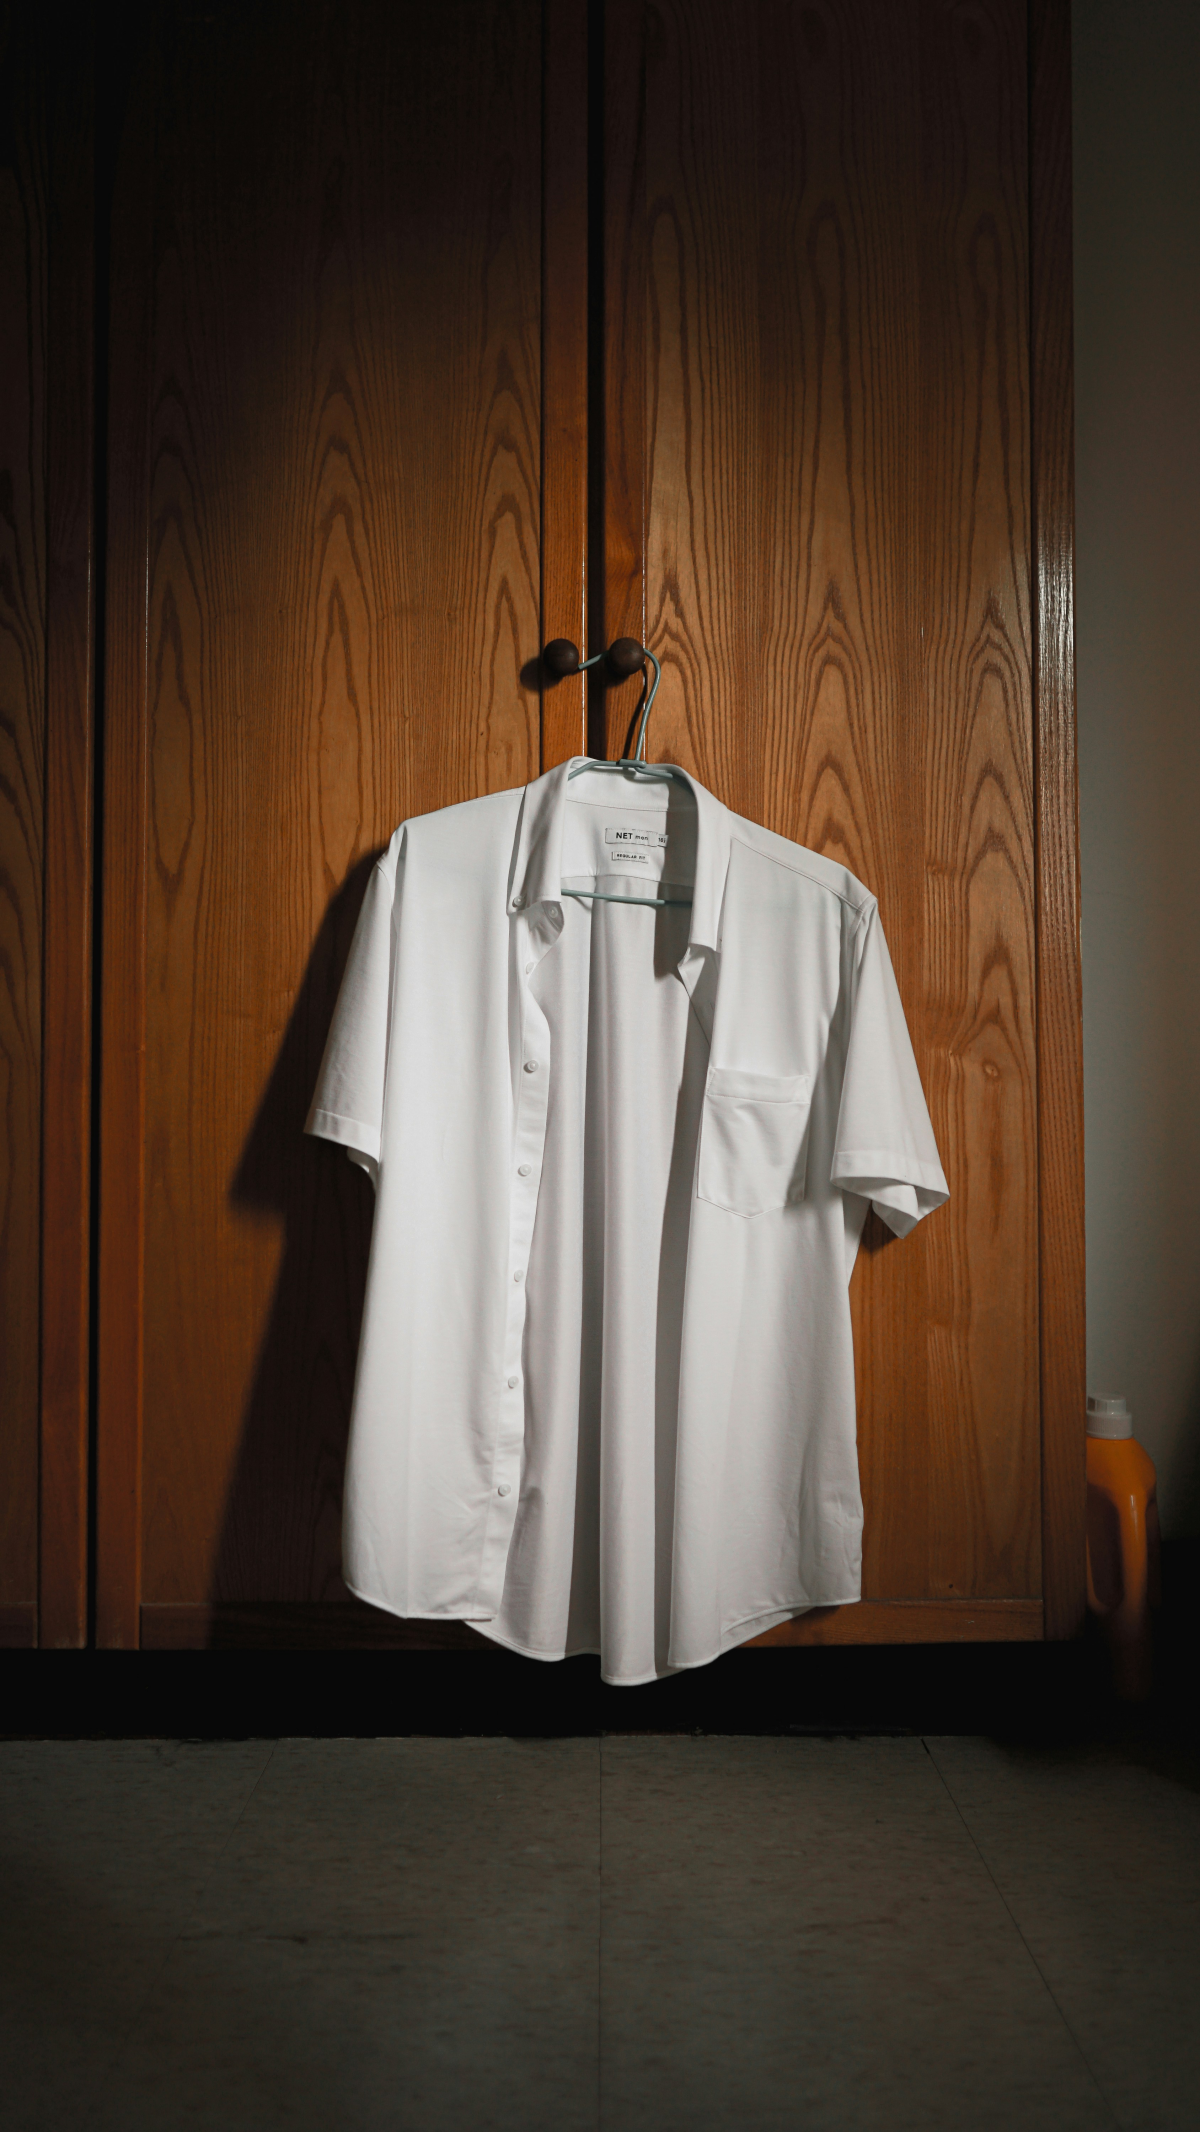 dress shirt hanging from cabinet